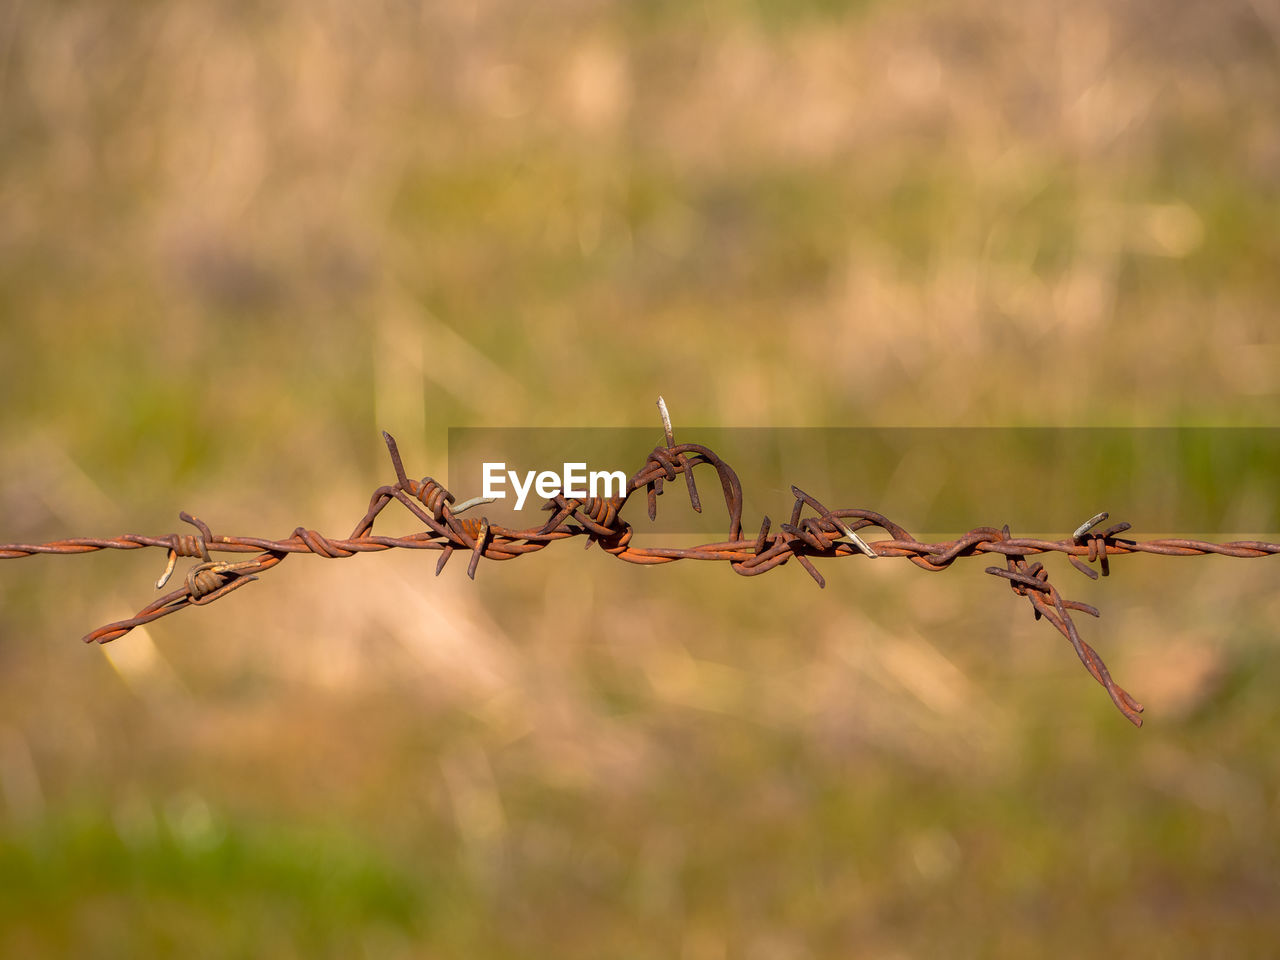 CLOSE-UP OF BARBED WIRE AGAINST FENCE